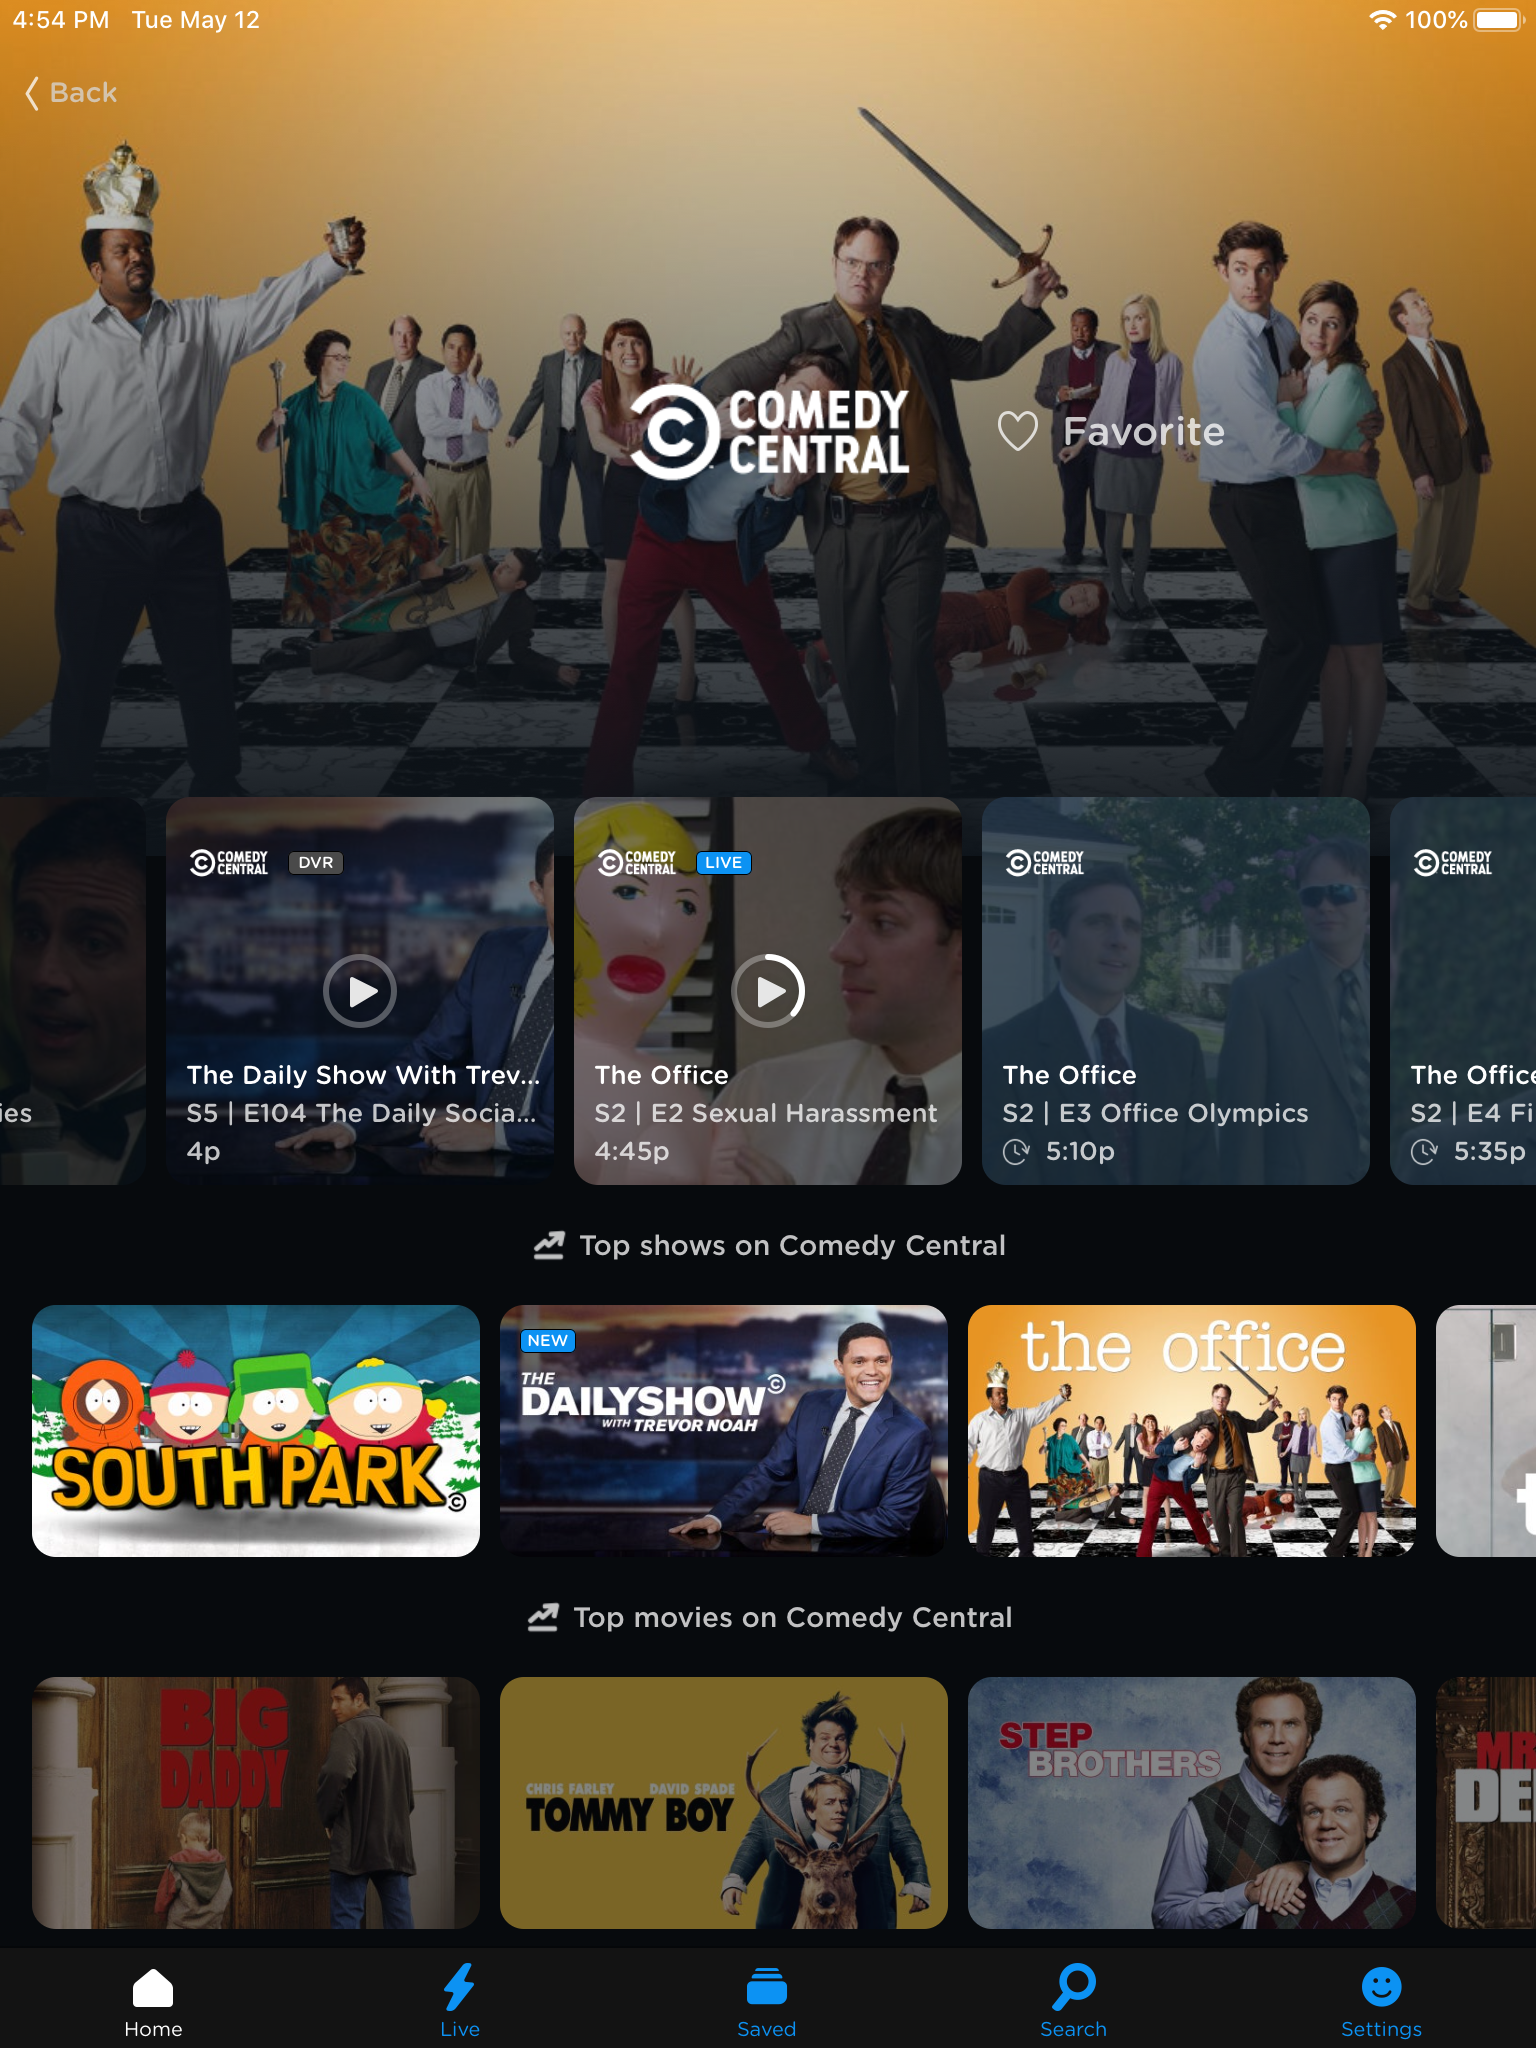 'Screenshot of Philo Channel Guide for Comedy Central on iPad'